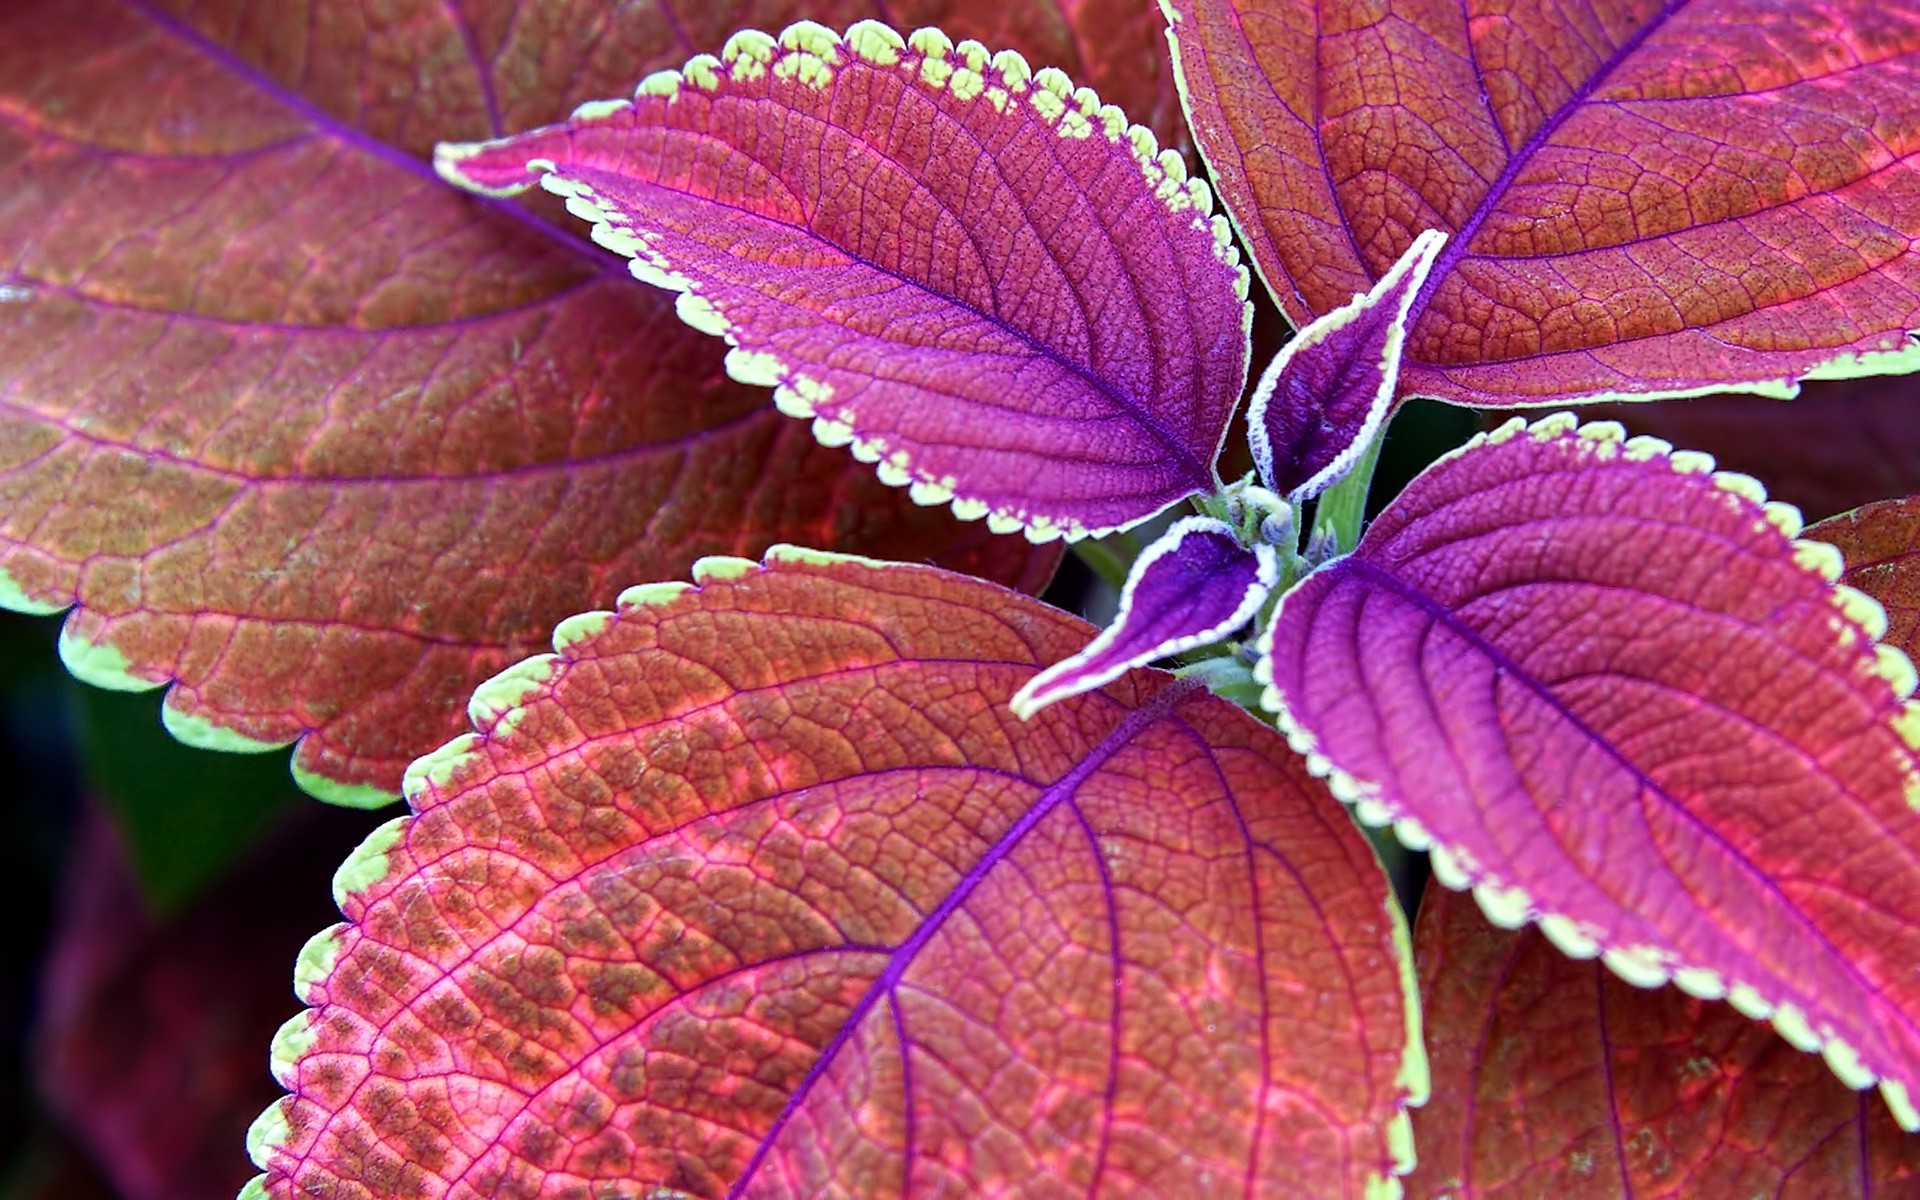 Nature Wallpaper HD with Macro Photo of Purple Leaves Wallpaper. Wallpaper Download. High Resolution Wallpaper